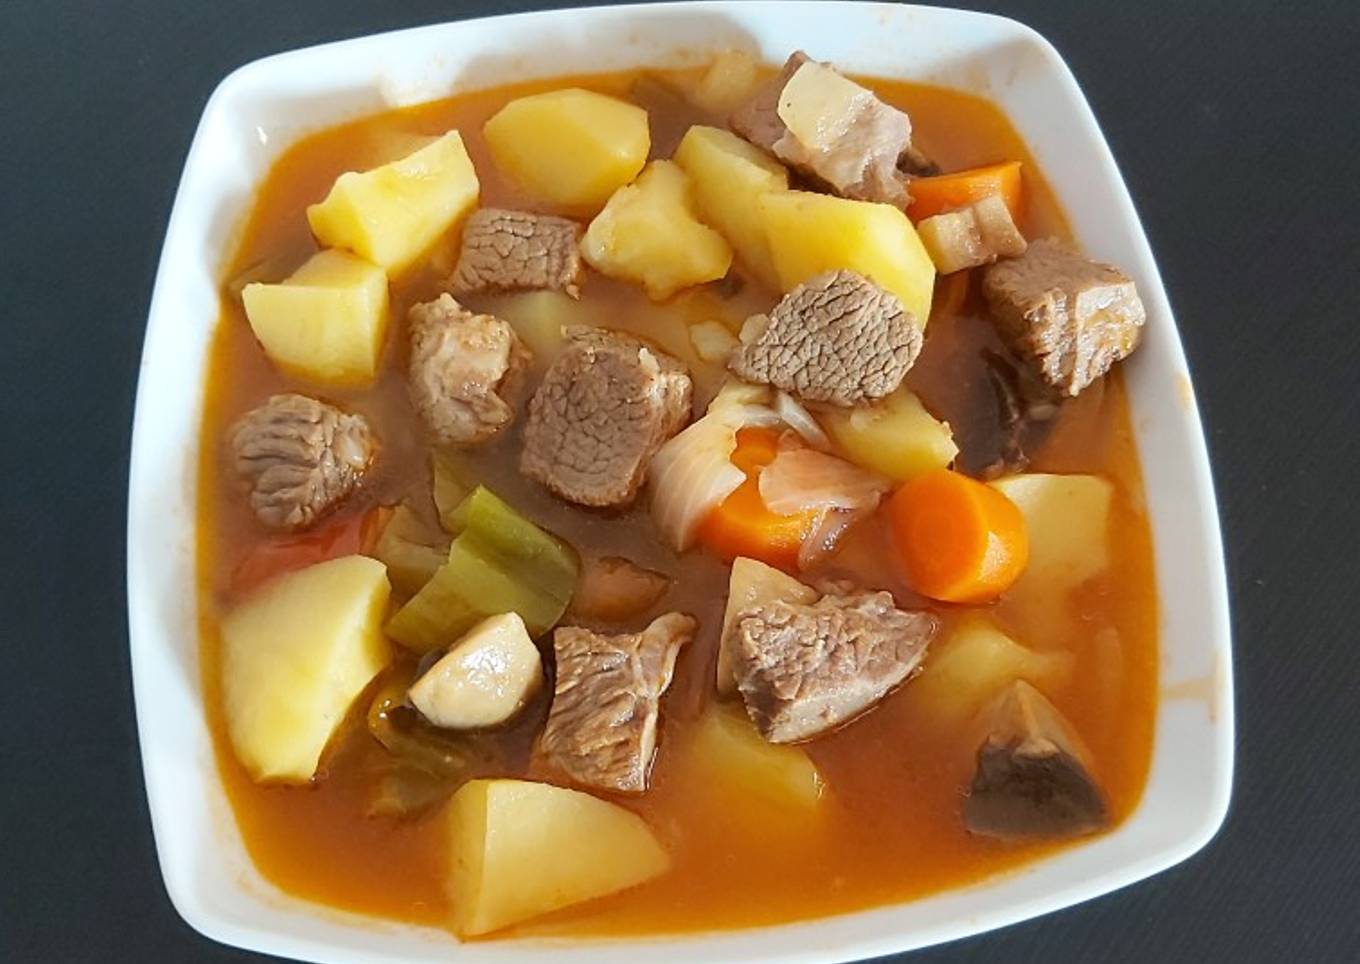 Beef stew with potatoes and veggies